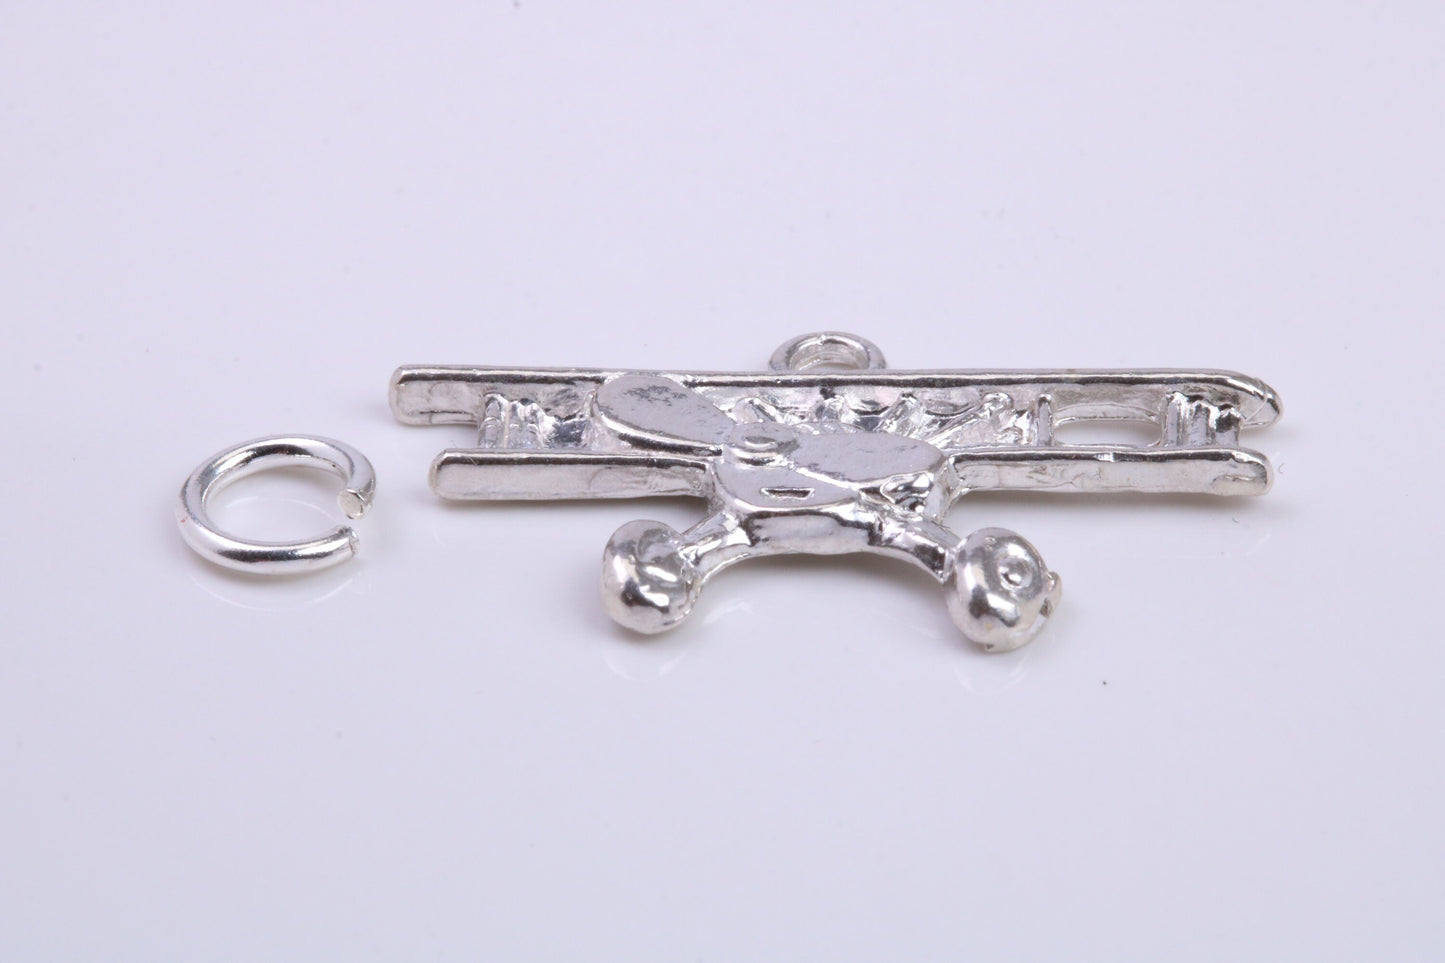 Airplane Charm, Traditional Charm, Made from Solid 925 Grade Sterling Silver, Complete with Attachment Link